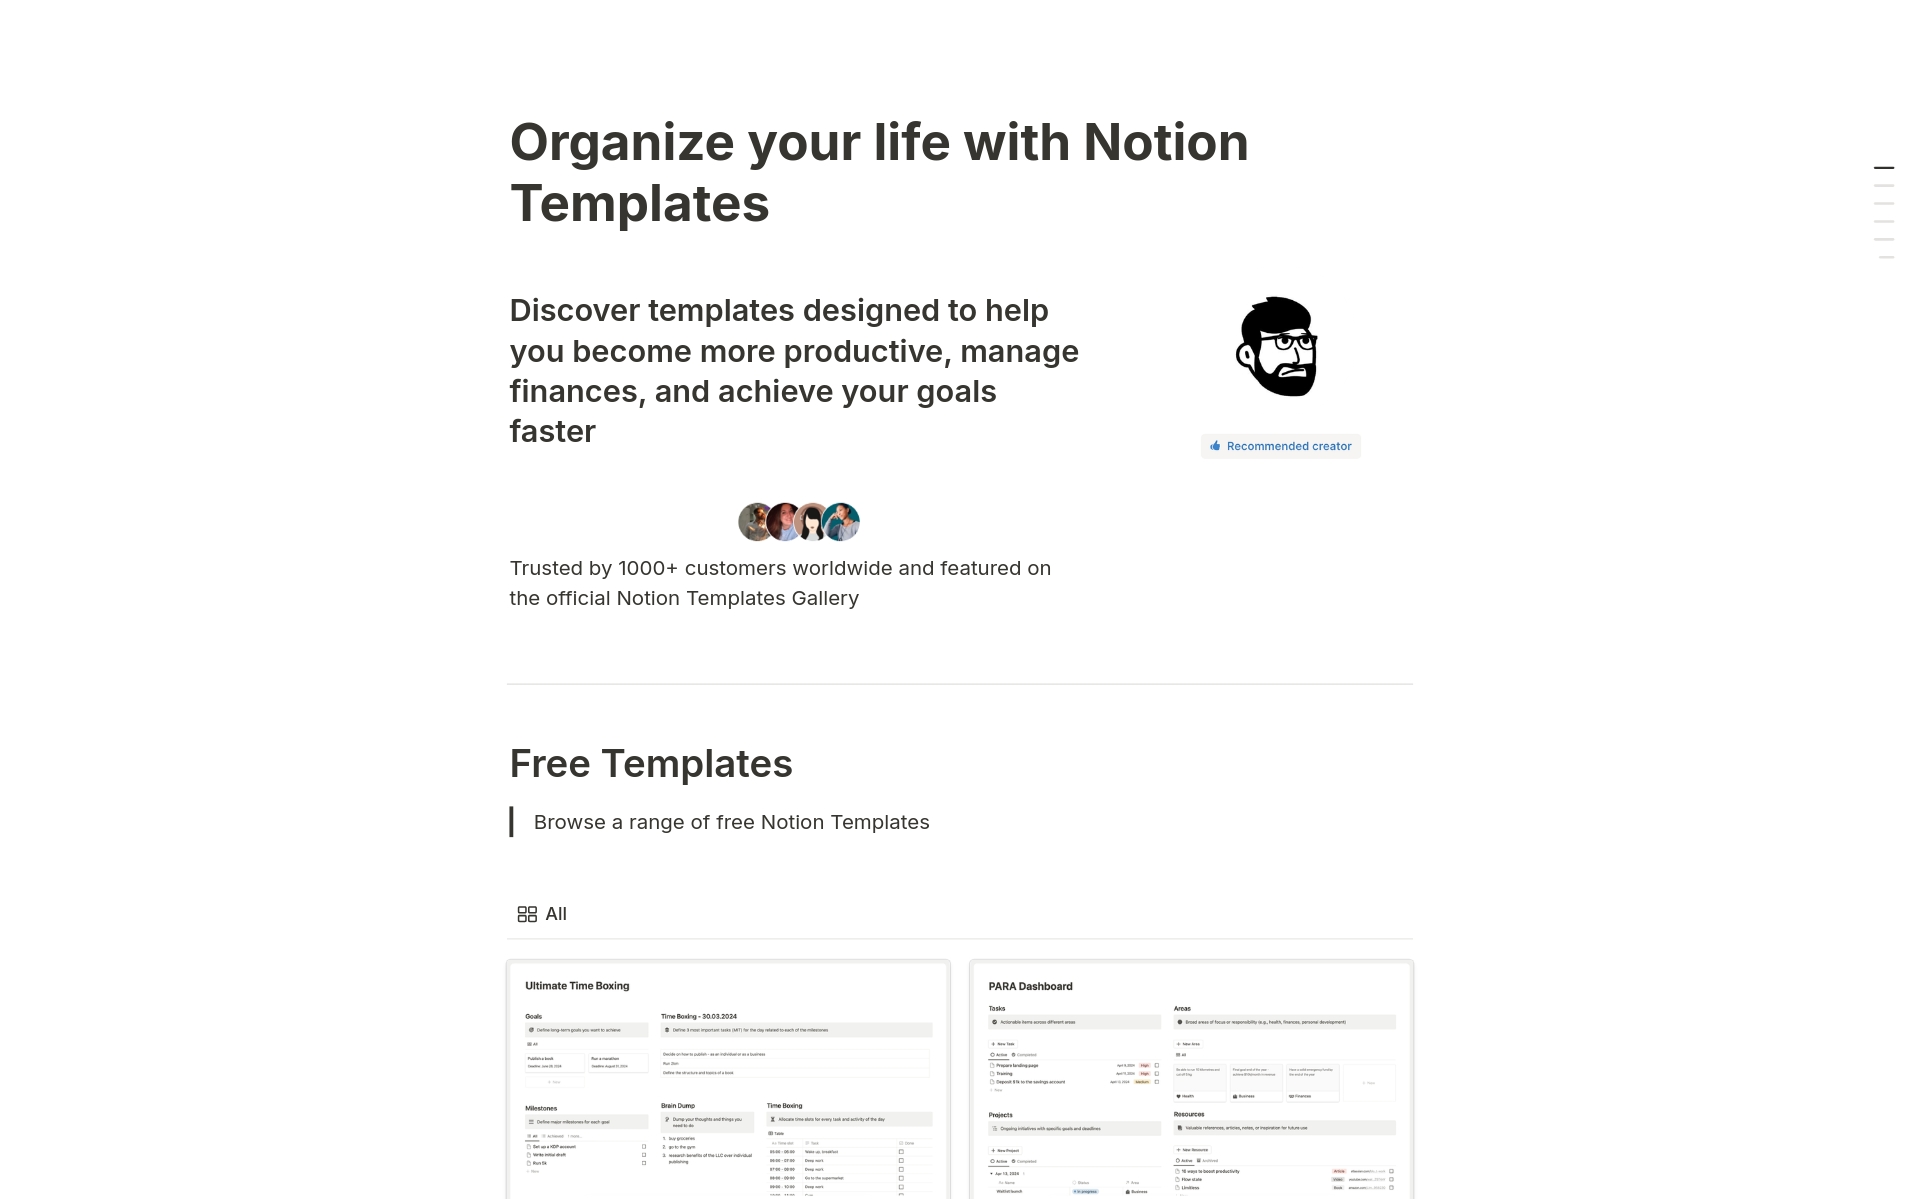 Build your own marketplace with Notion
Easily configure your marketplace by providing your own text and visuals, and hit publish. Connect your own domain to remove the Notion subdomain, Google Analytics, and SEO